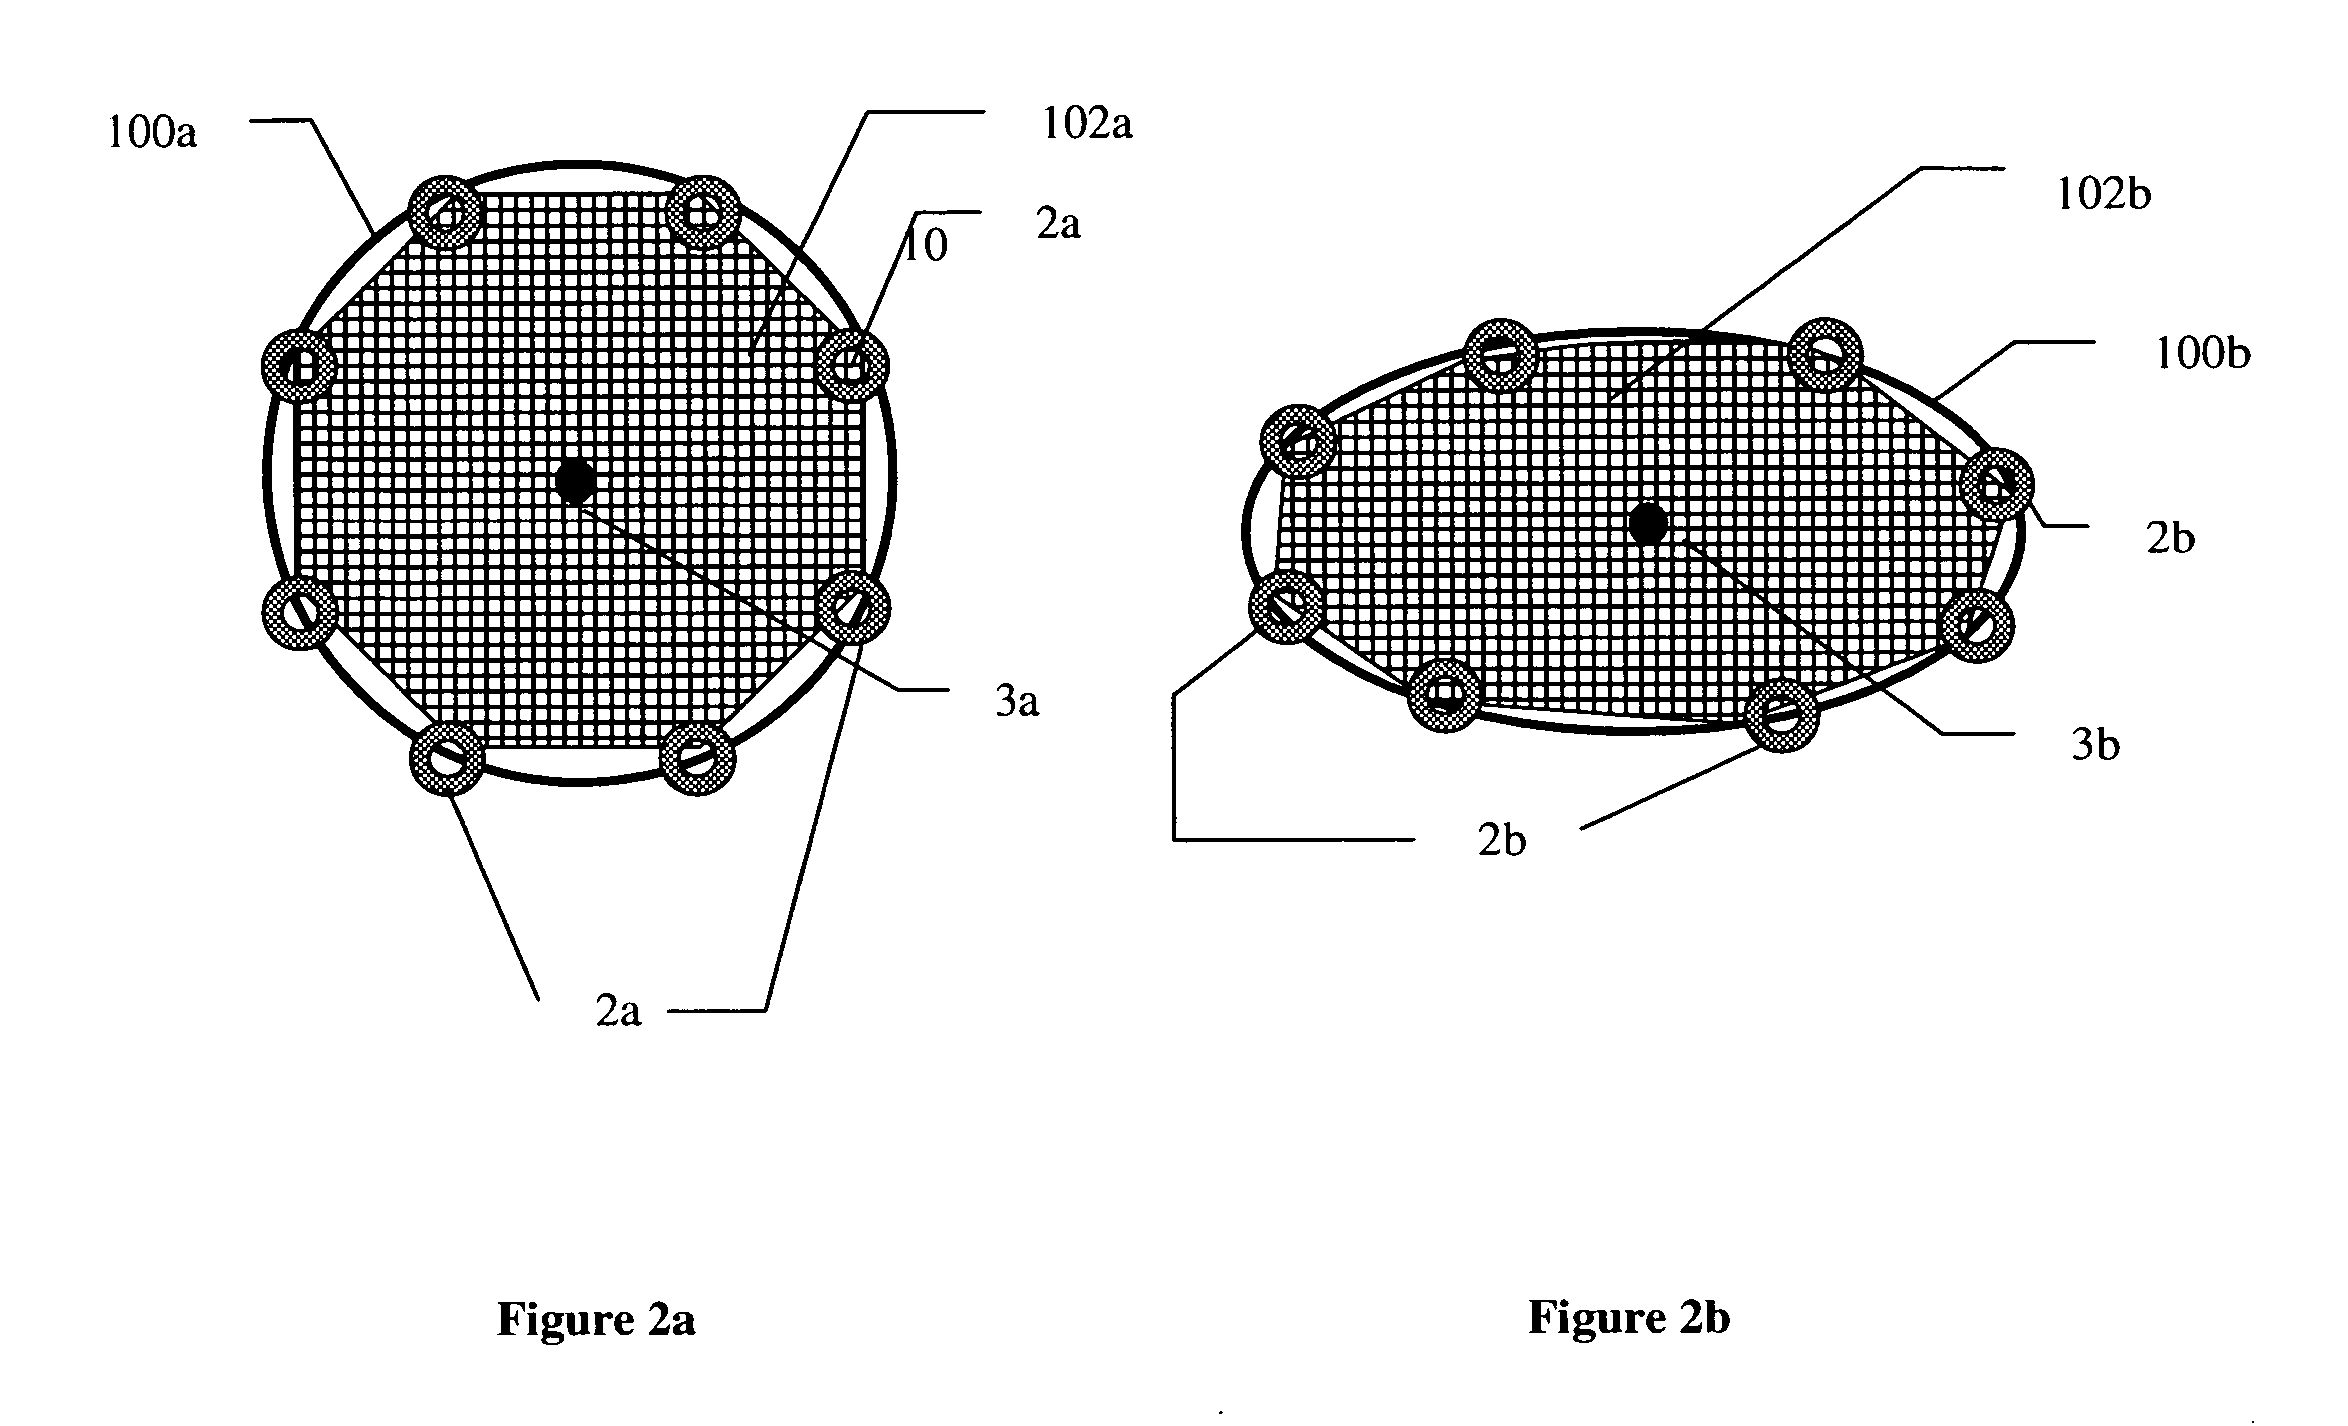 Distal protection apparatus with improved wall apposition